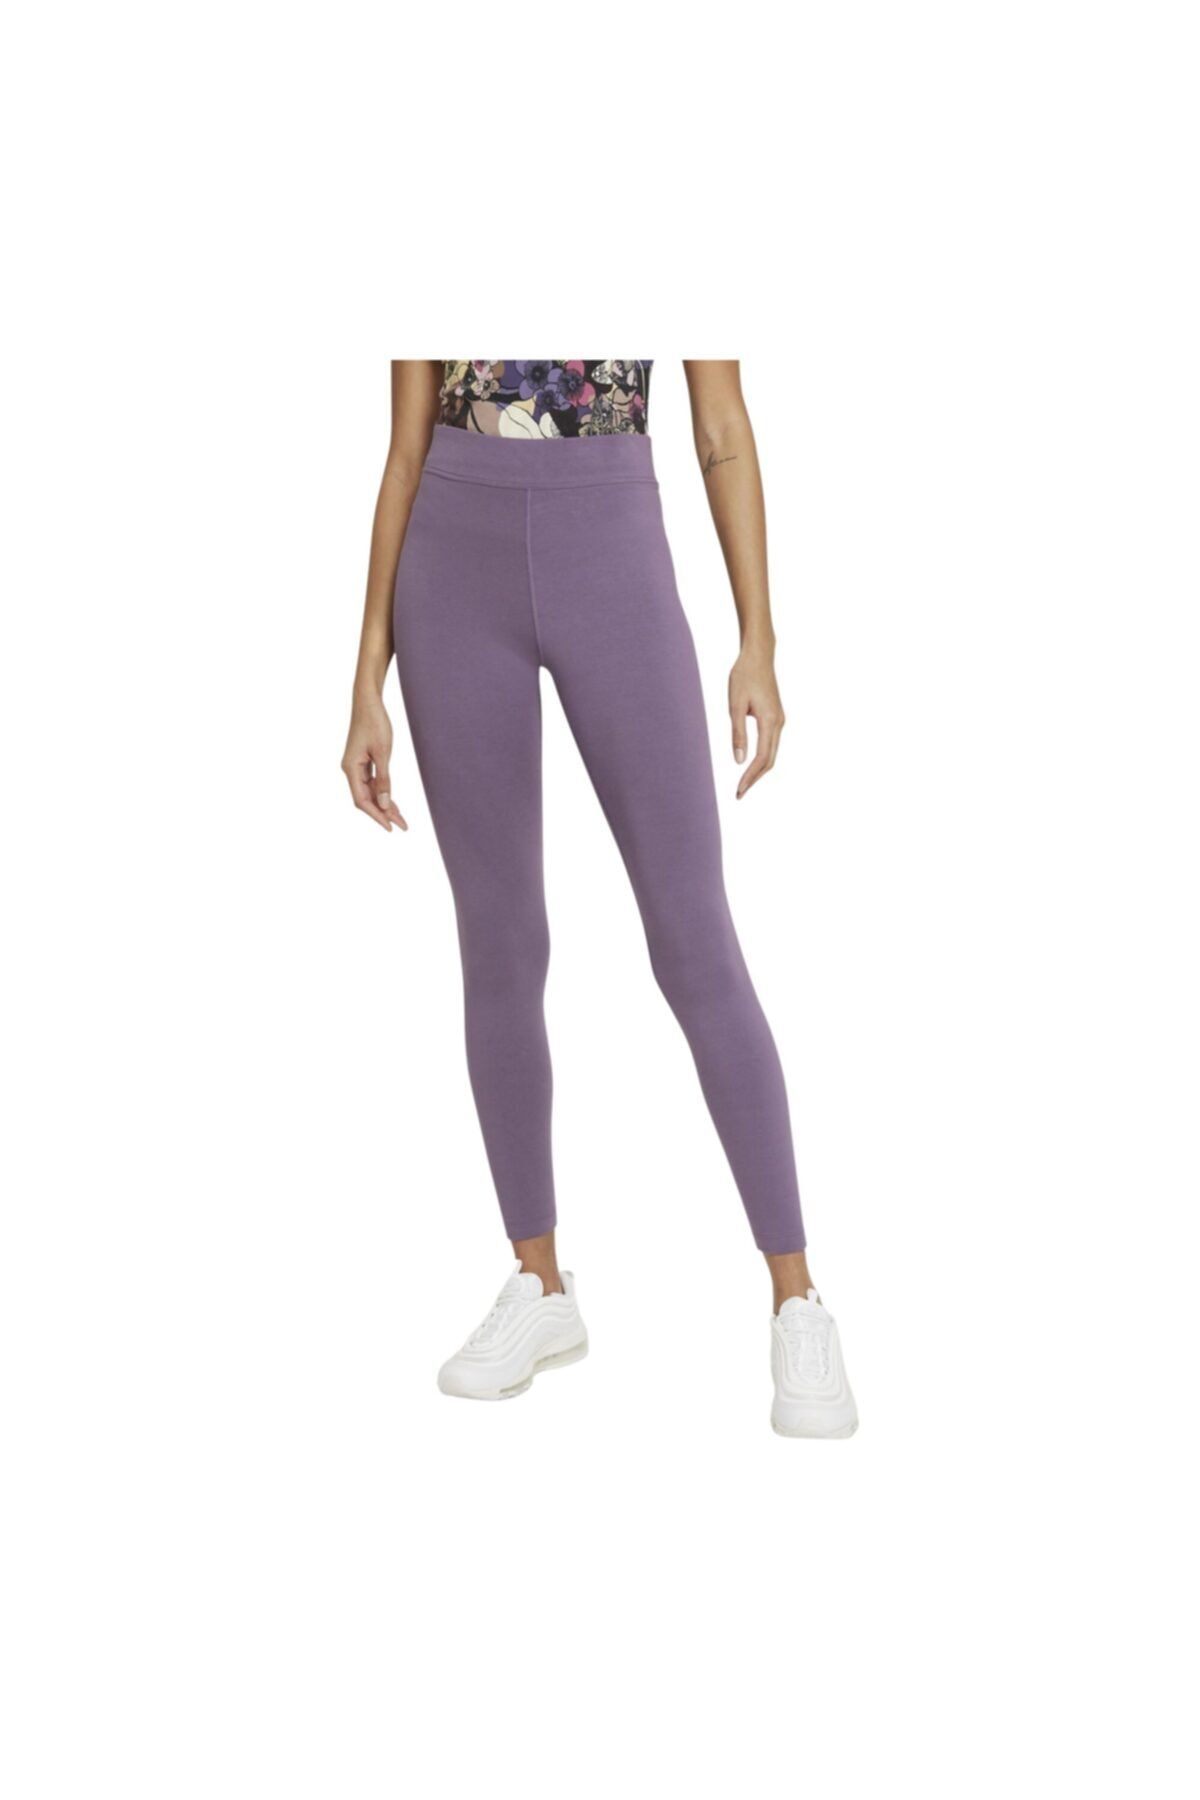 Spring Sale: All Items (Preview) Purple Cold Weather Tights & Leggings. Nike .com